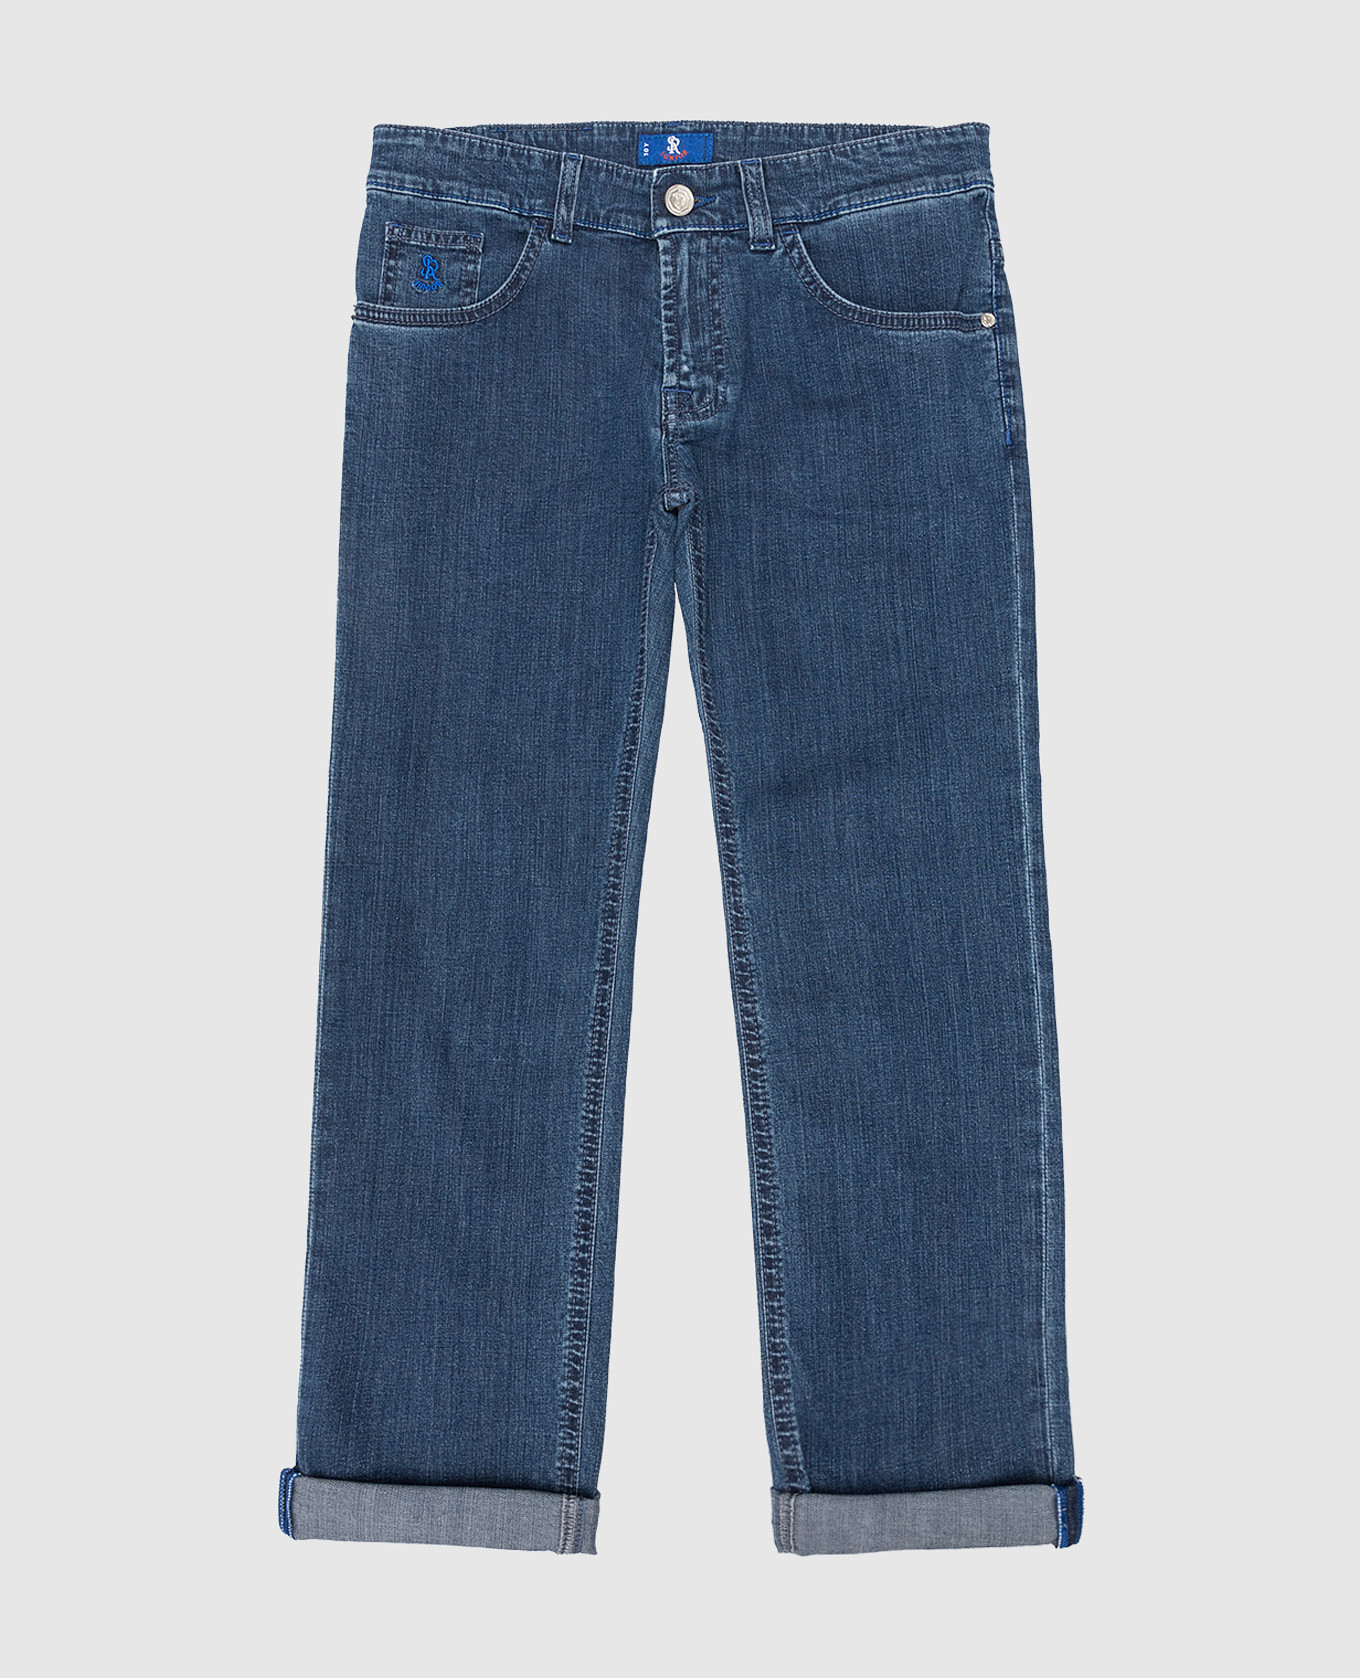 Kids blue jeans with logo